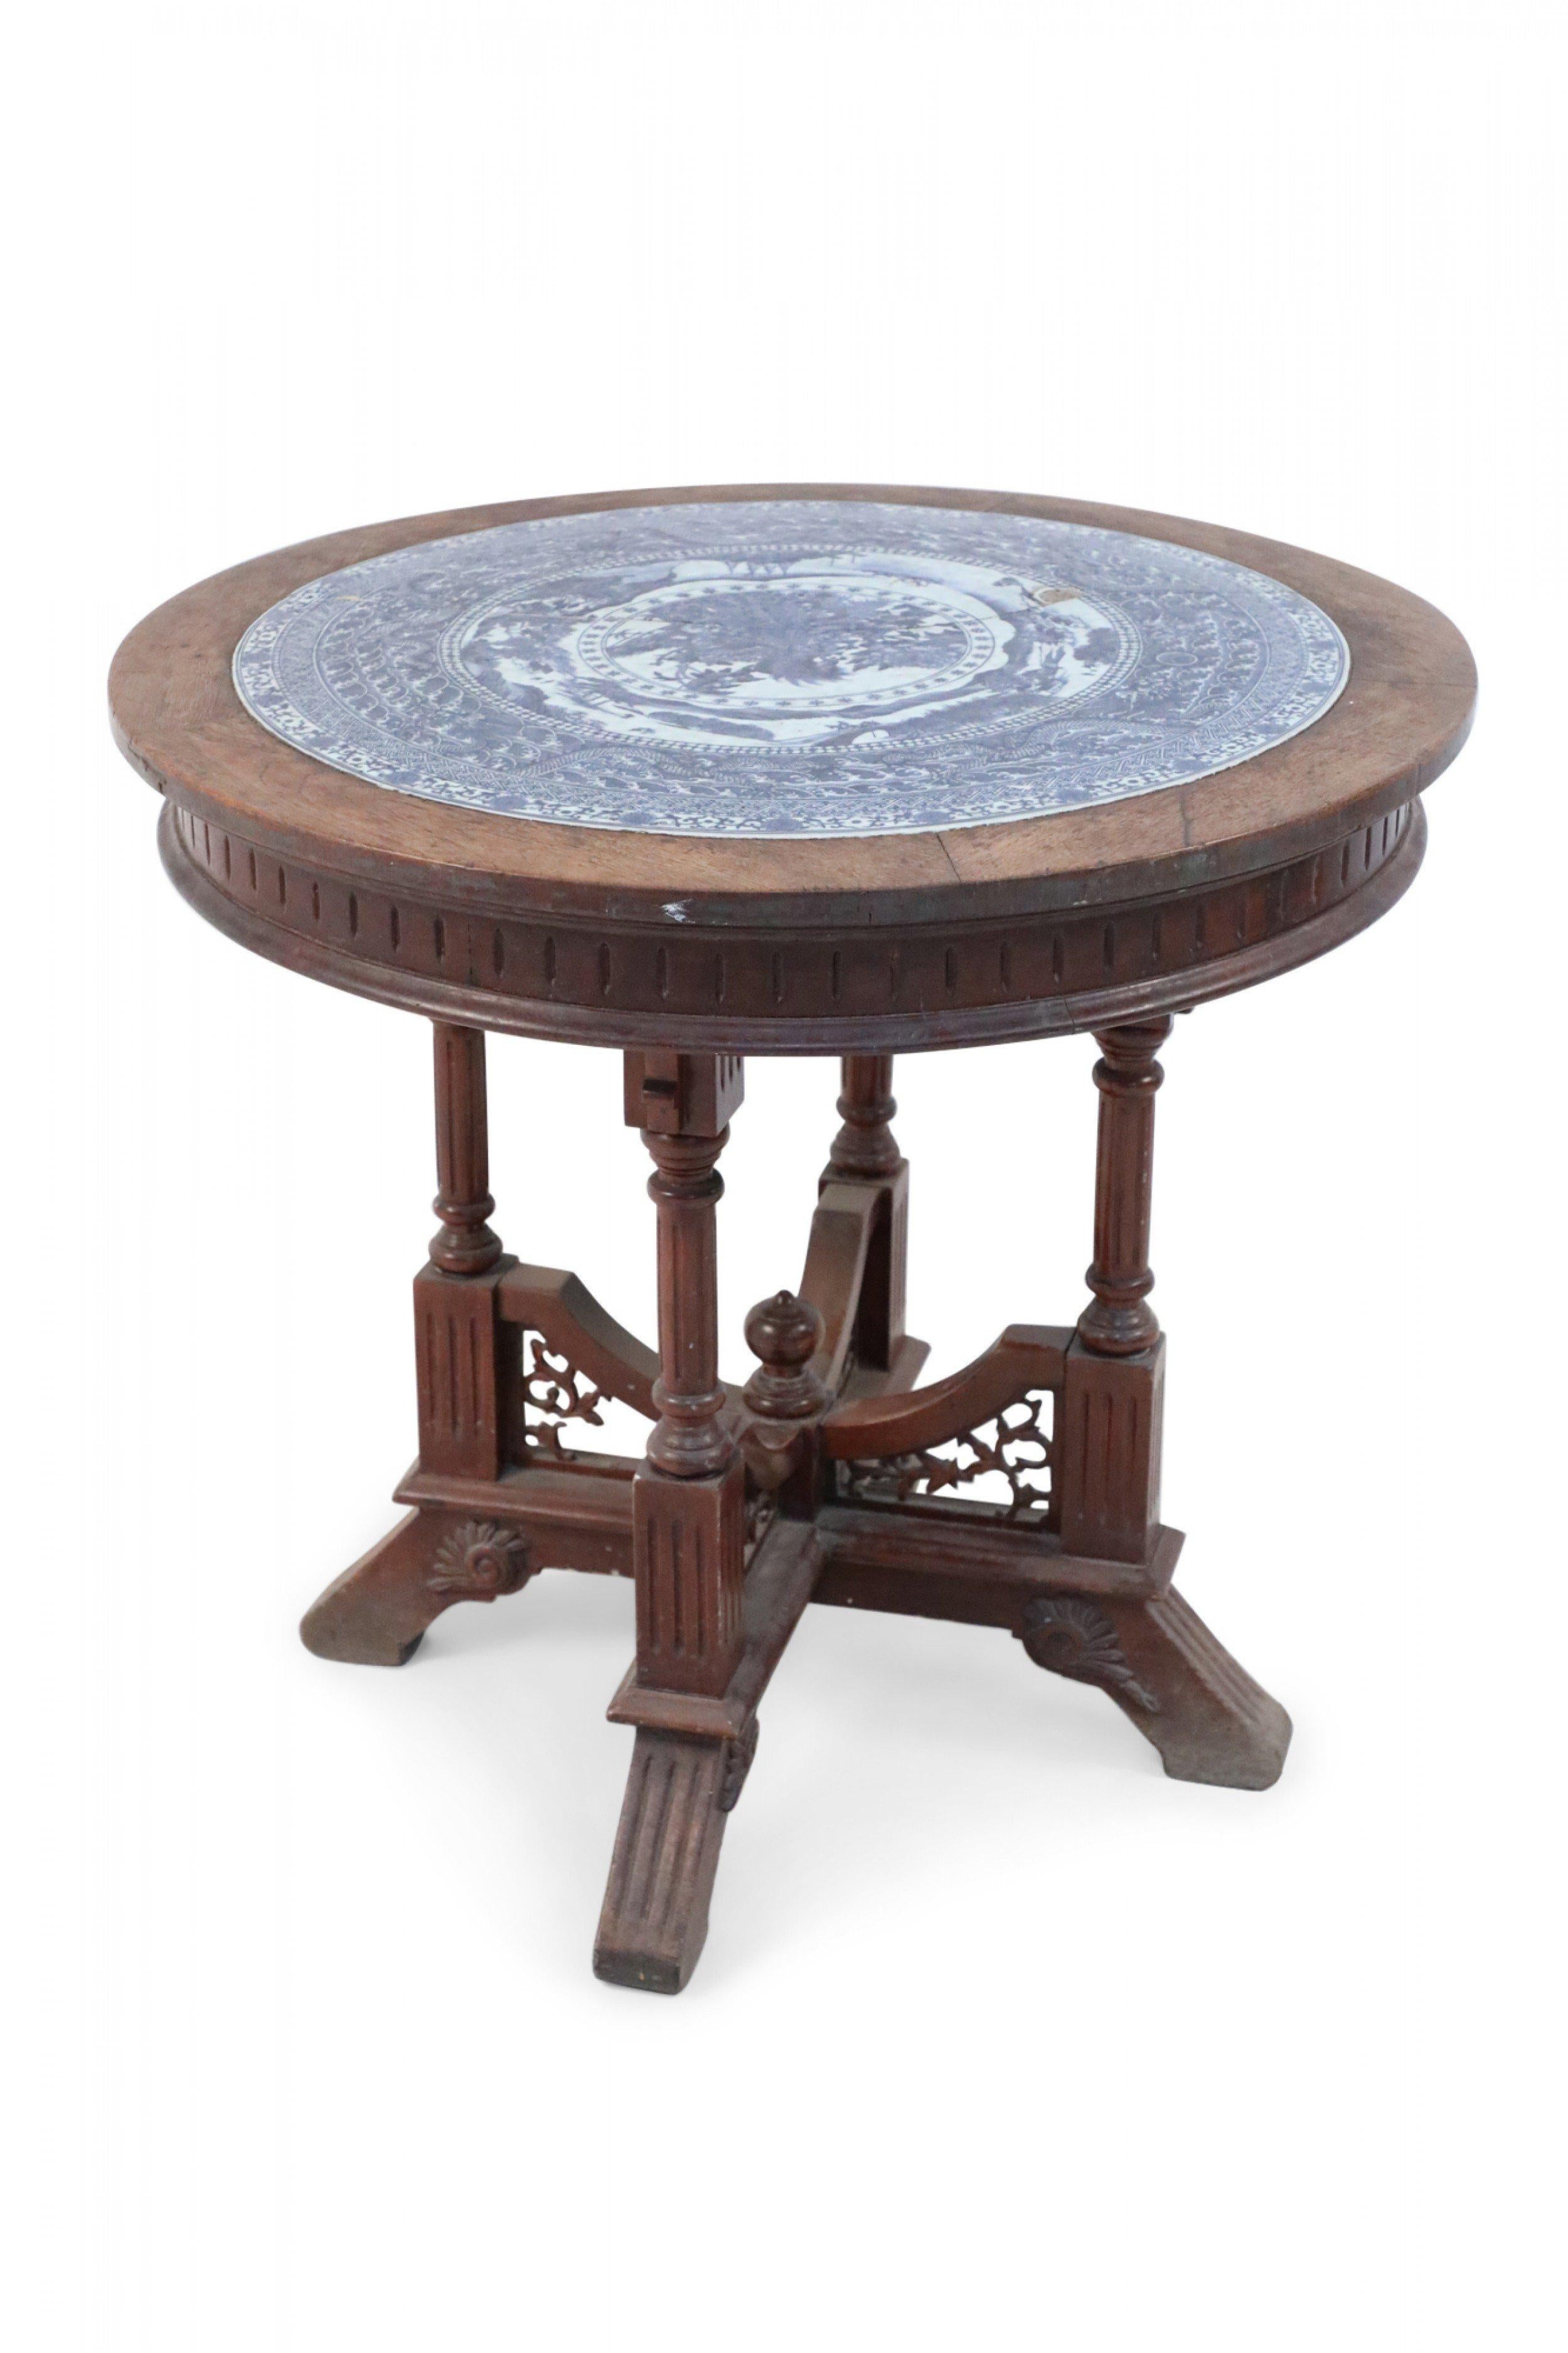 that's a small victorian round wooden table